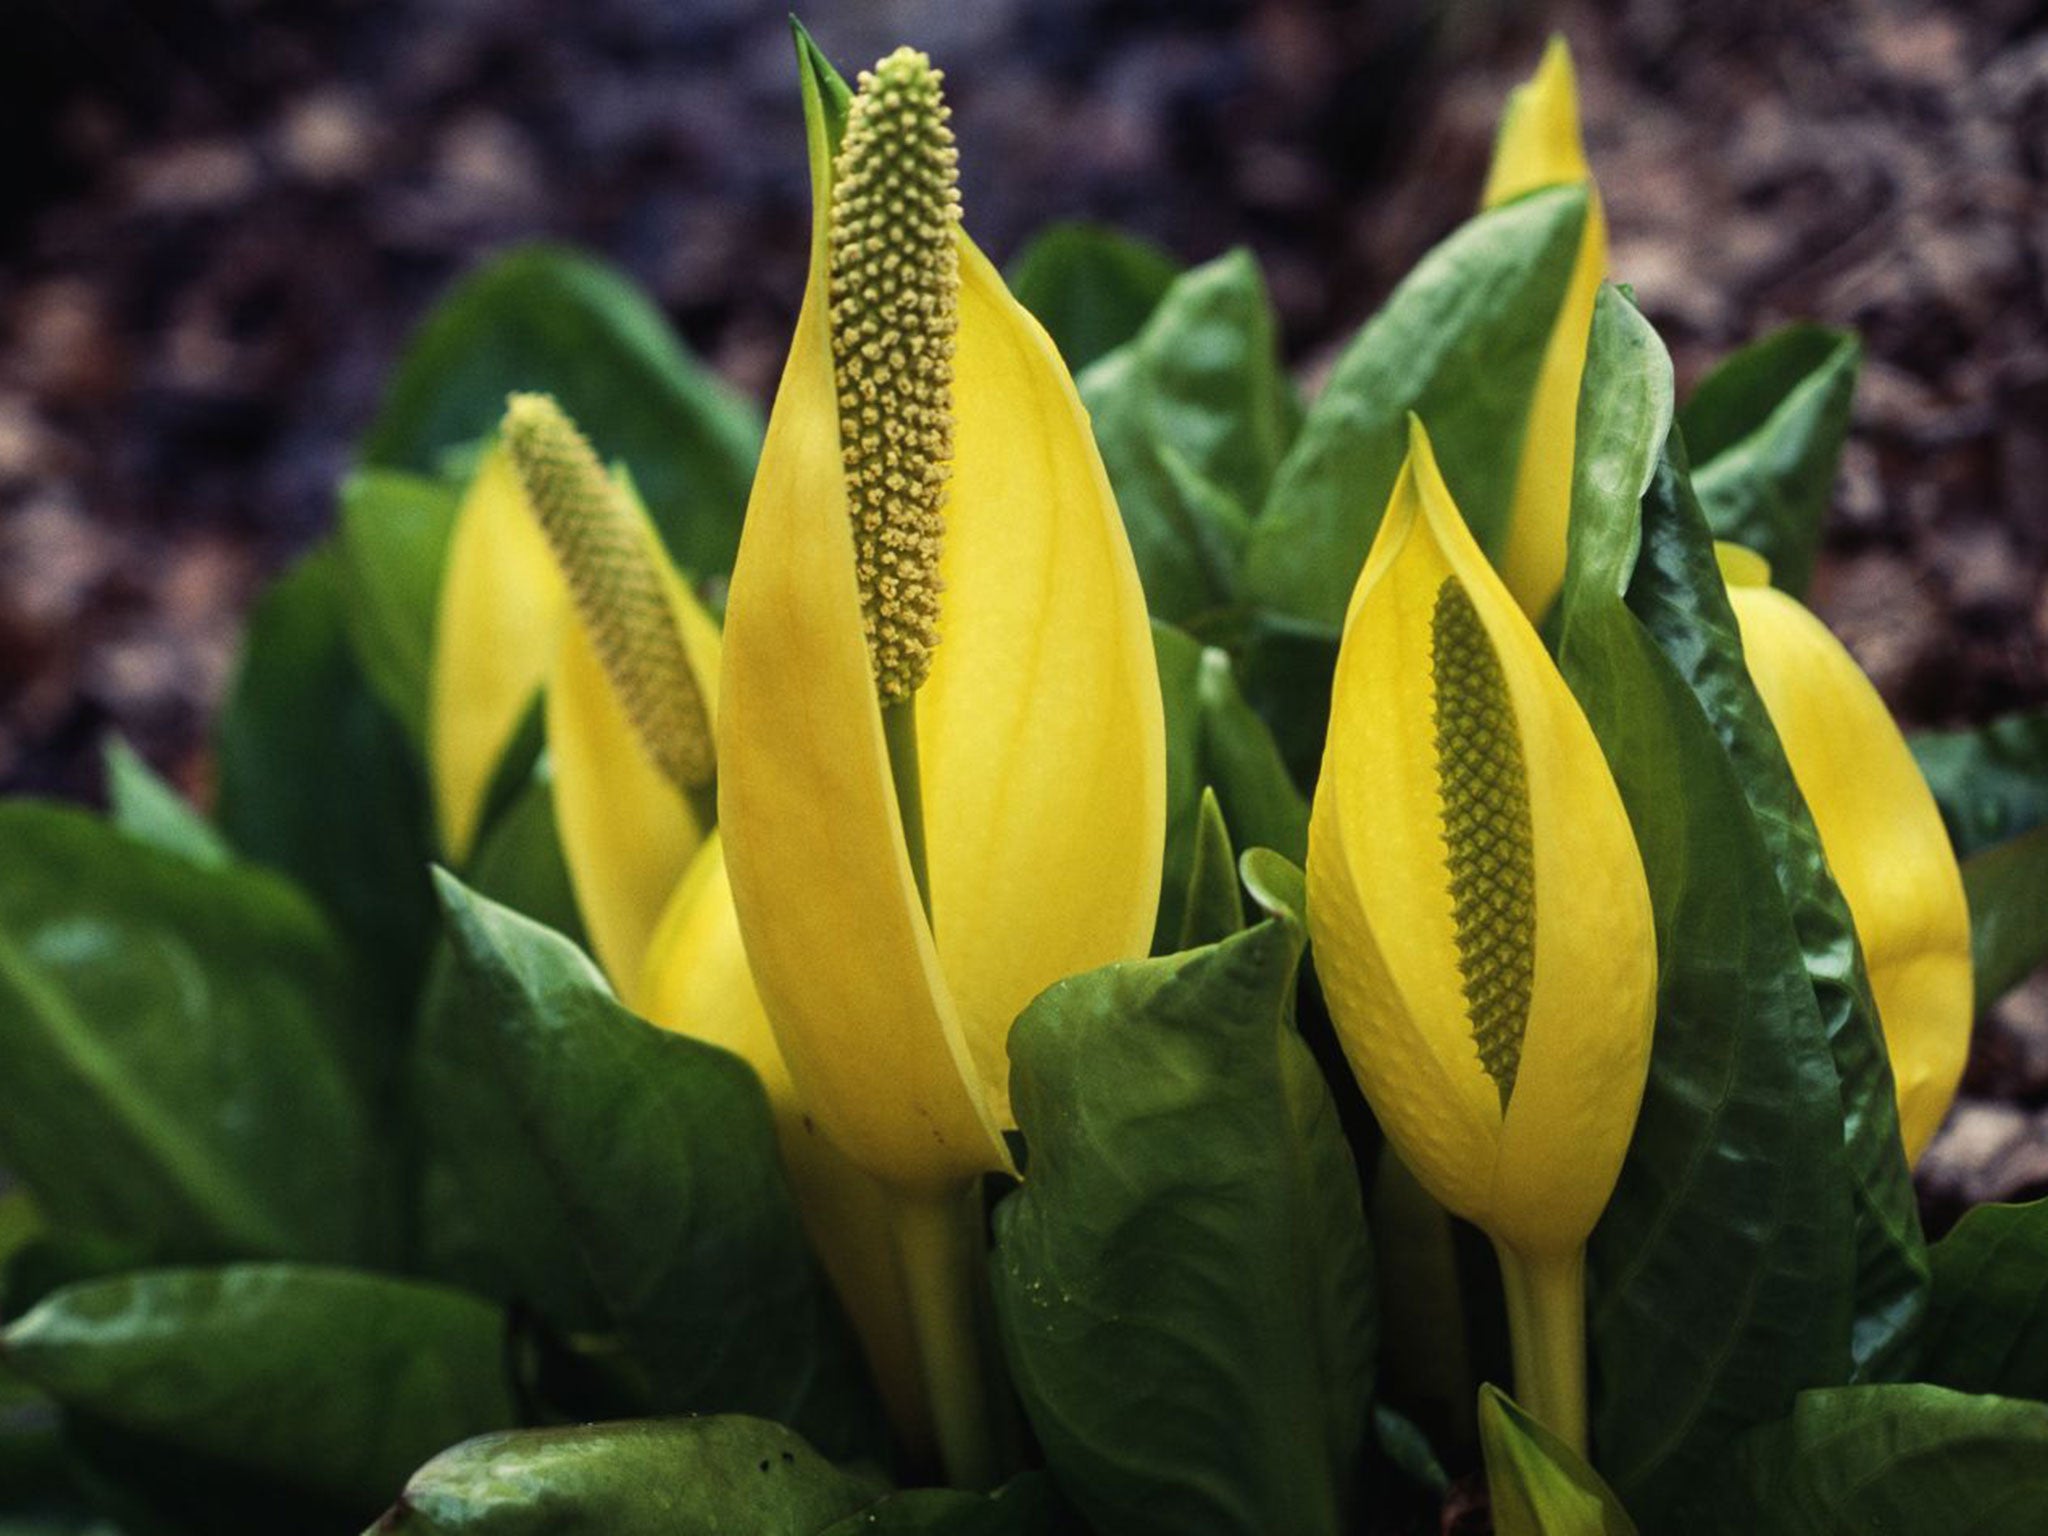 Skunk Cabbage grows up to 1.5m tall and produces a ‘malodourous smell’